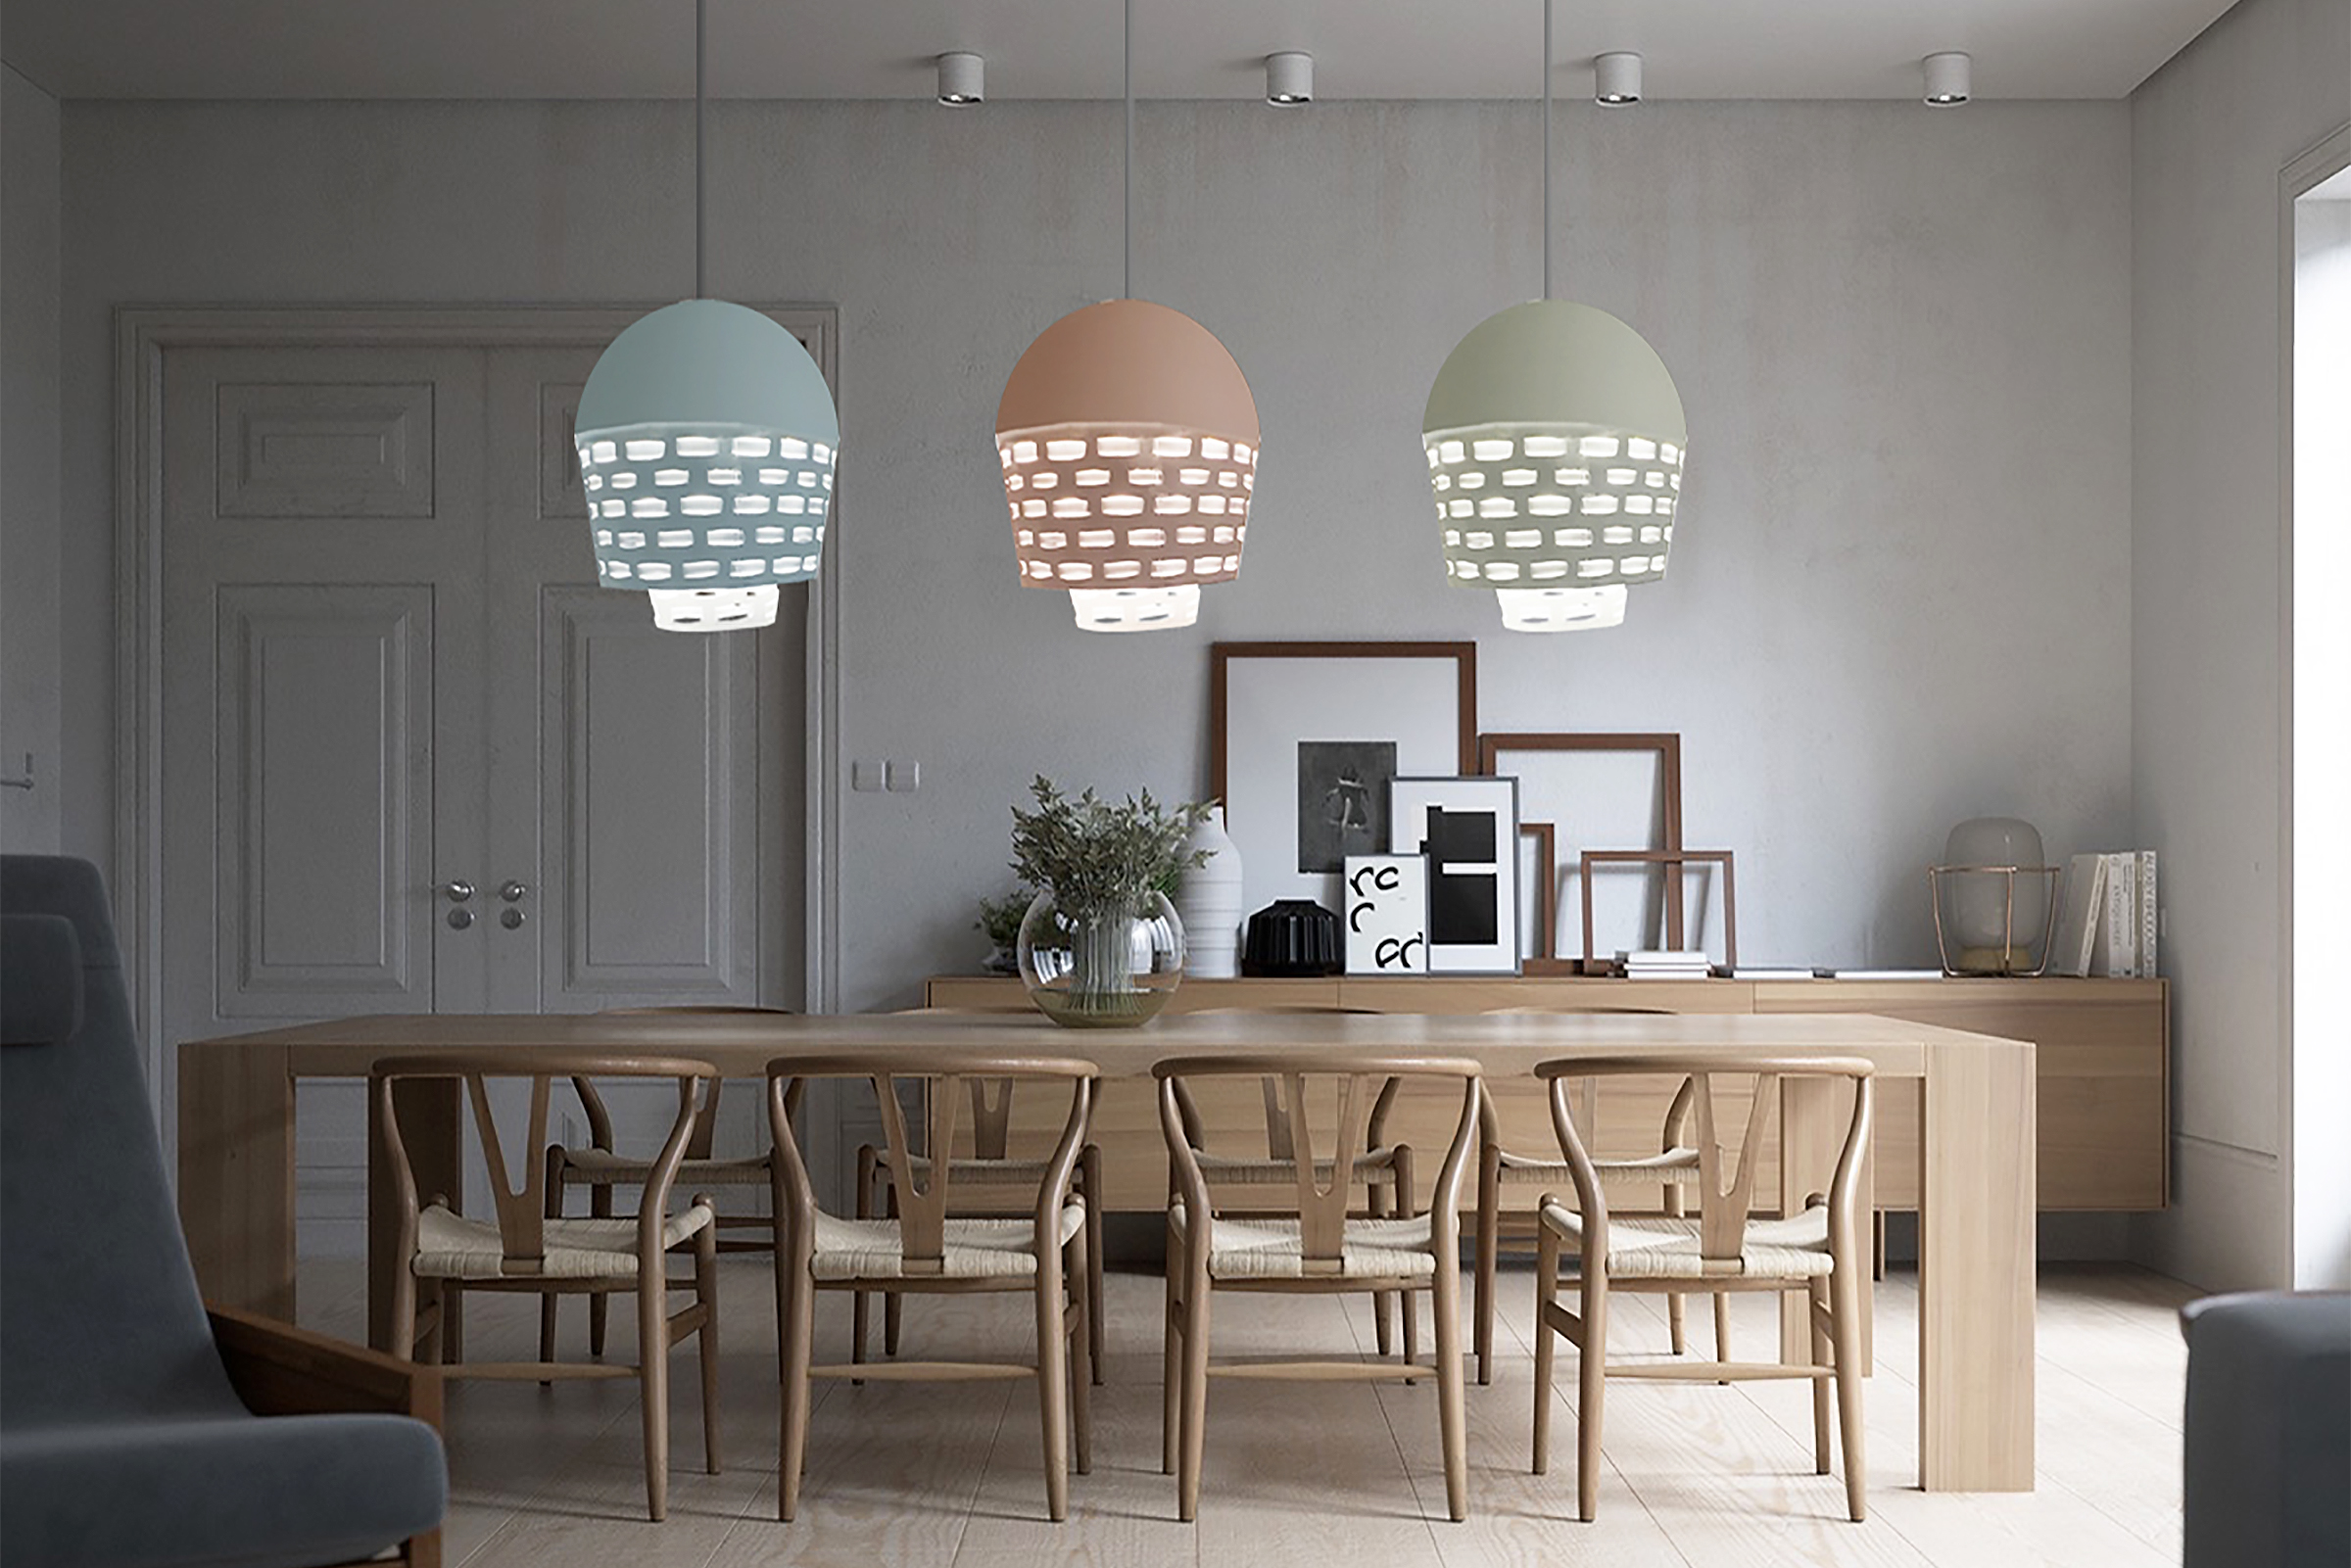 series of hanging light fixtures modeled in colored paper